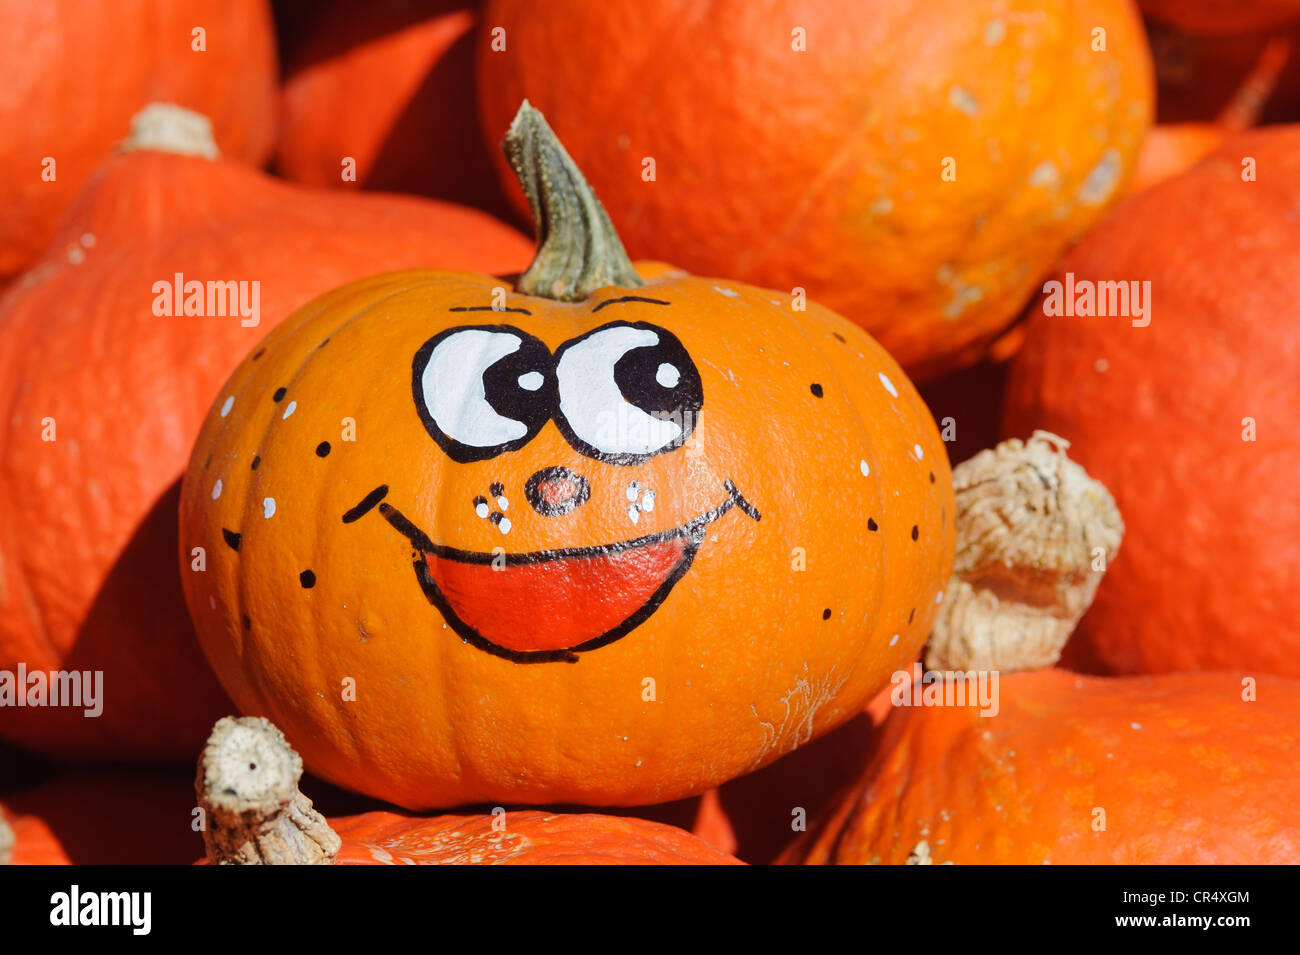 Pumpkin with a funny face Stock Photo - Alamy